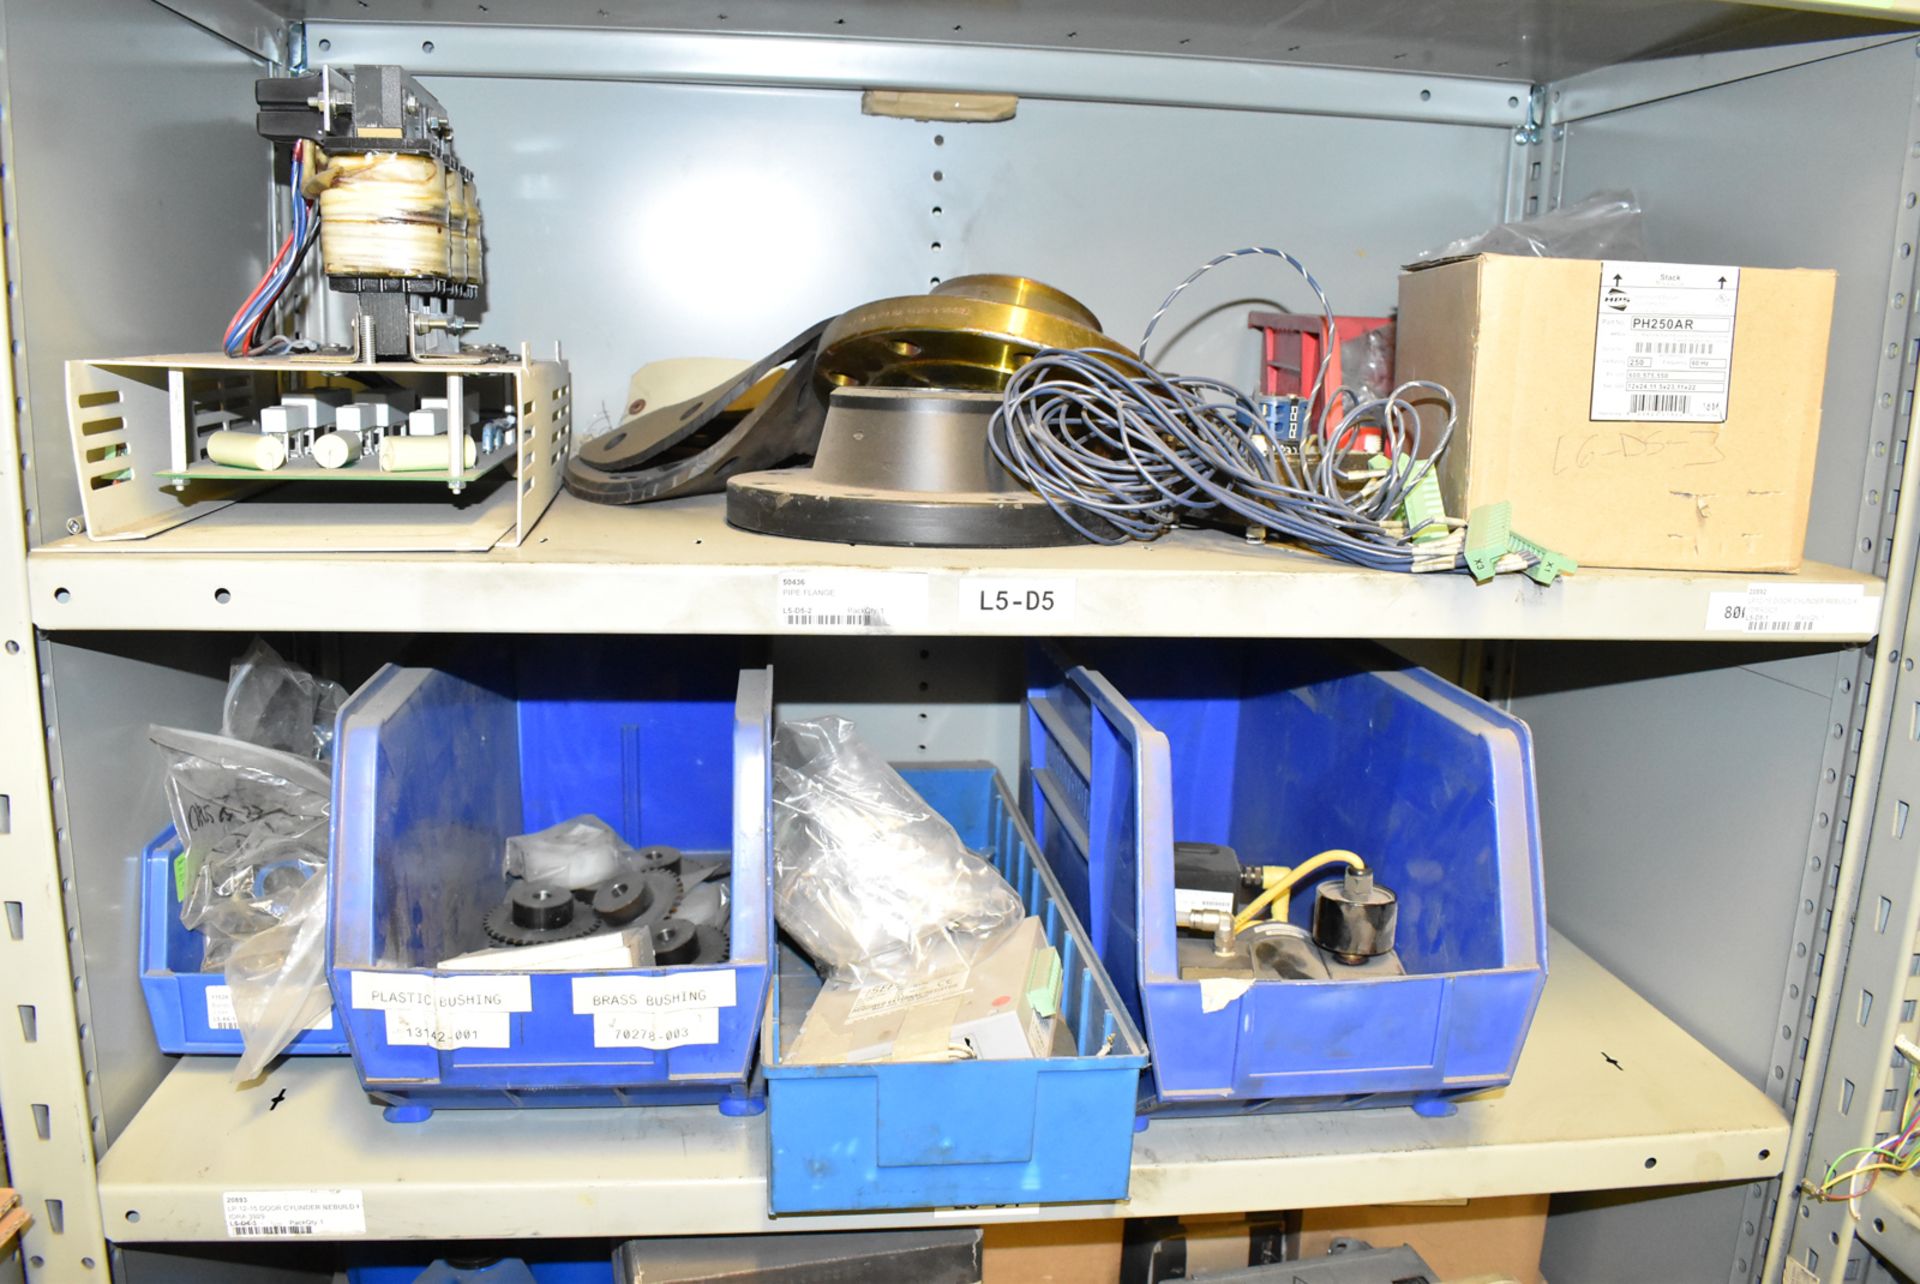 LOT/ CONTENTS OF SHELVES INCLUDING PIPE FLANGE, DOOR COMPONENTS, BUSHINGS, COOLING FAN, SPARE - Image 2 of 3